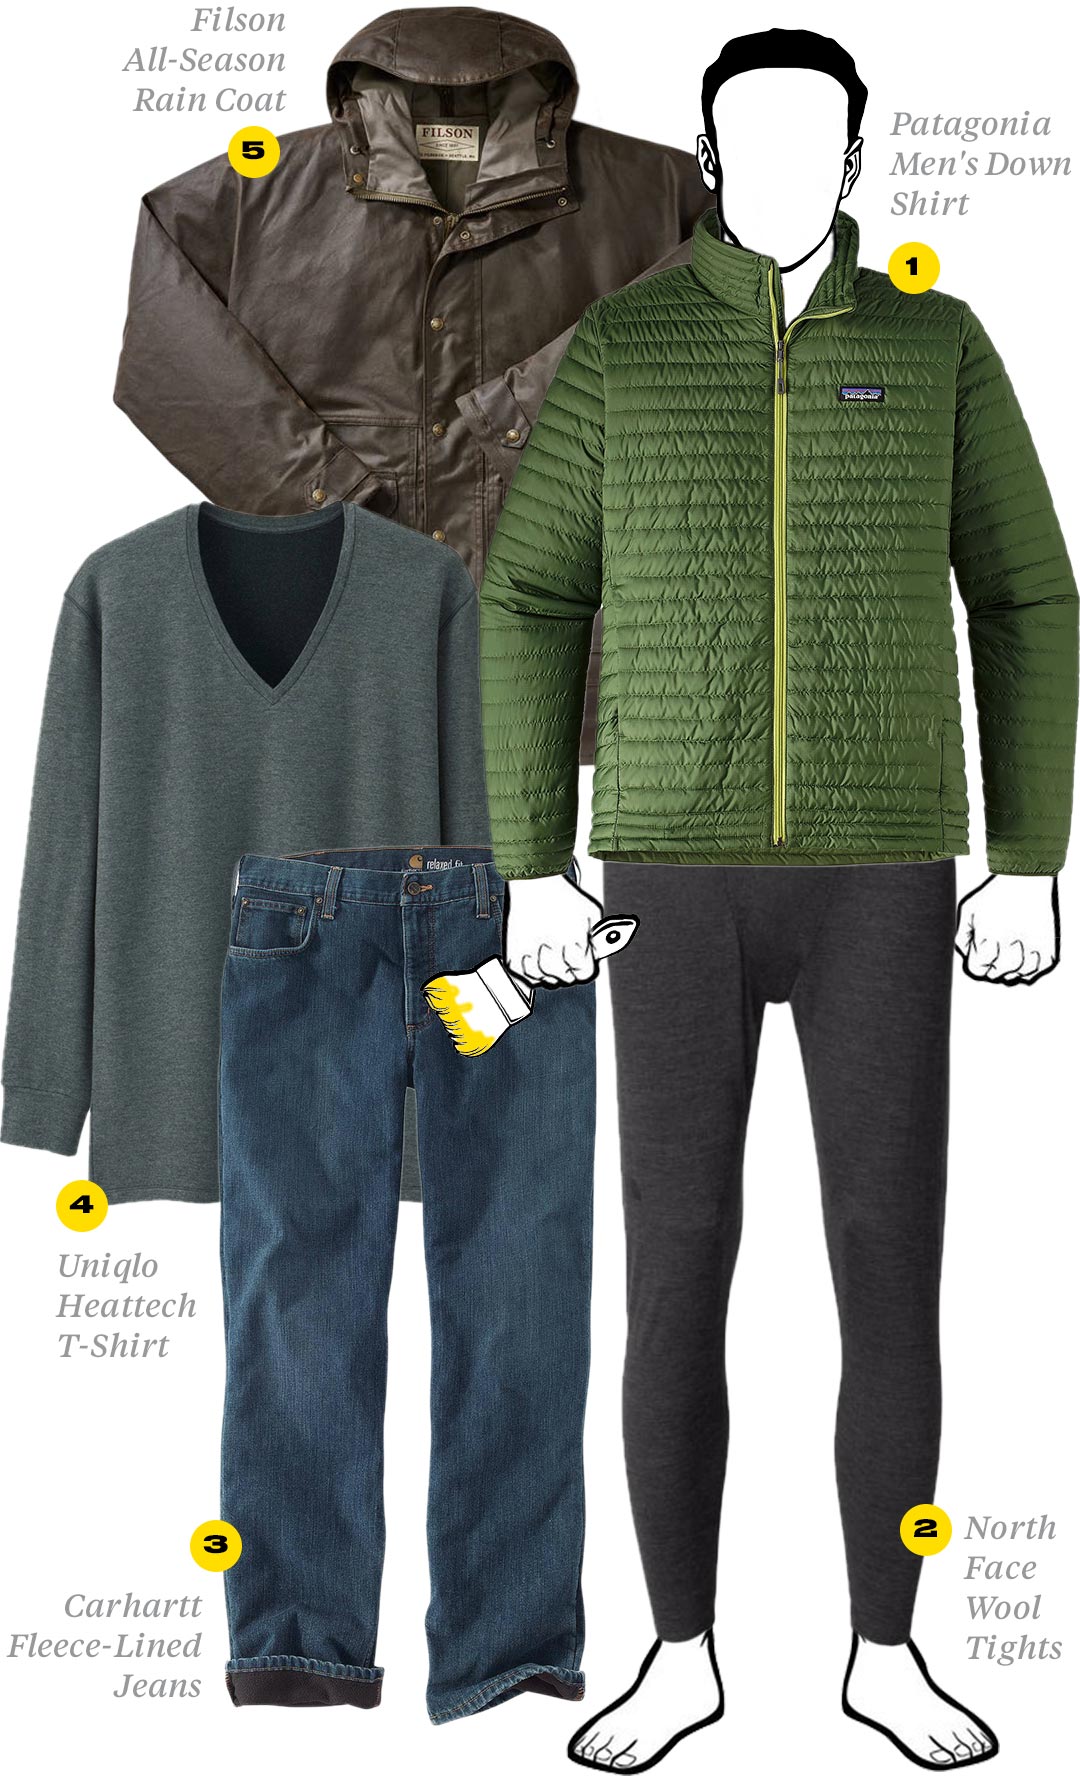 Cold weather tips: Layer up